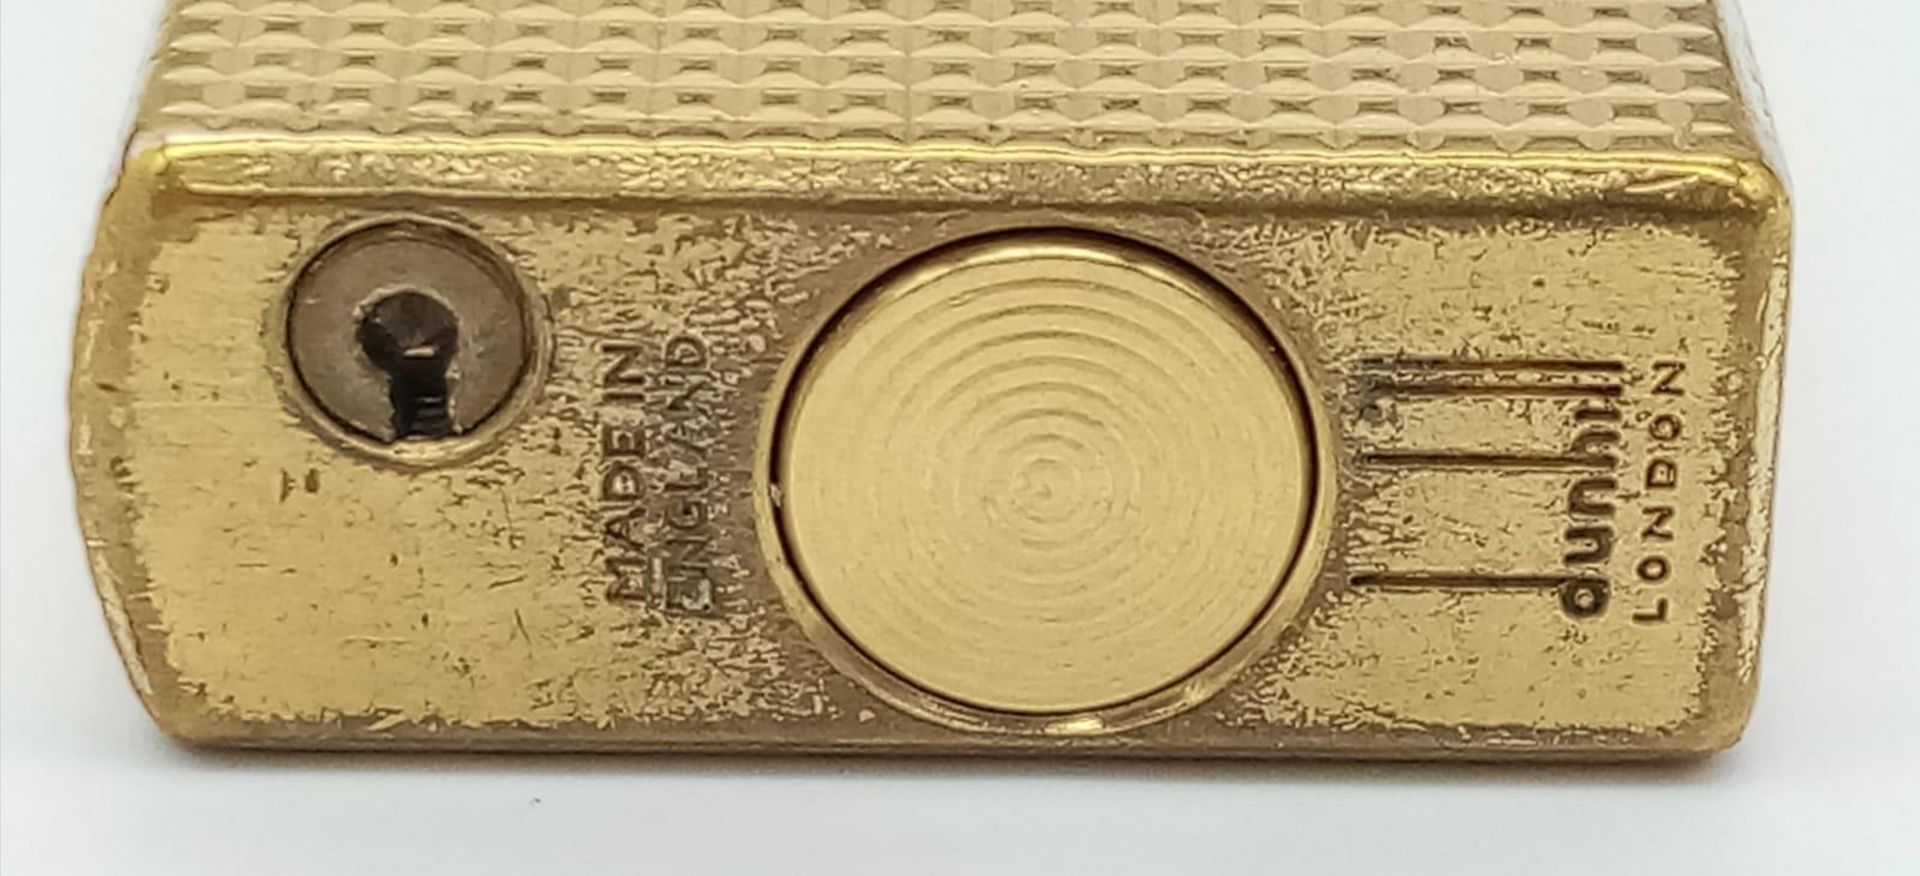 A Vintage Dunhill Gold Plated 70 Lighter. Textured exterior - 6cm x 3cm. In need of flint and gas. - Image 4 of 8